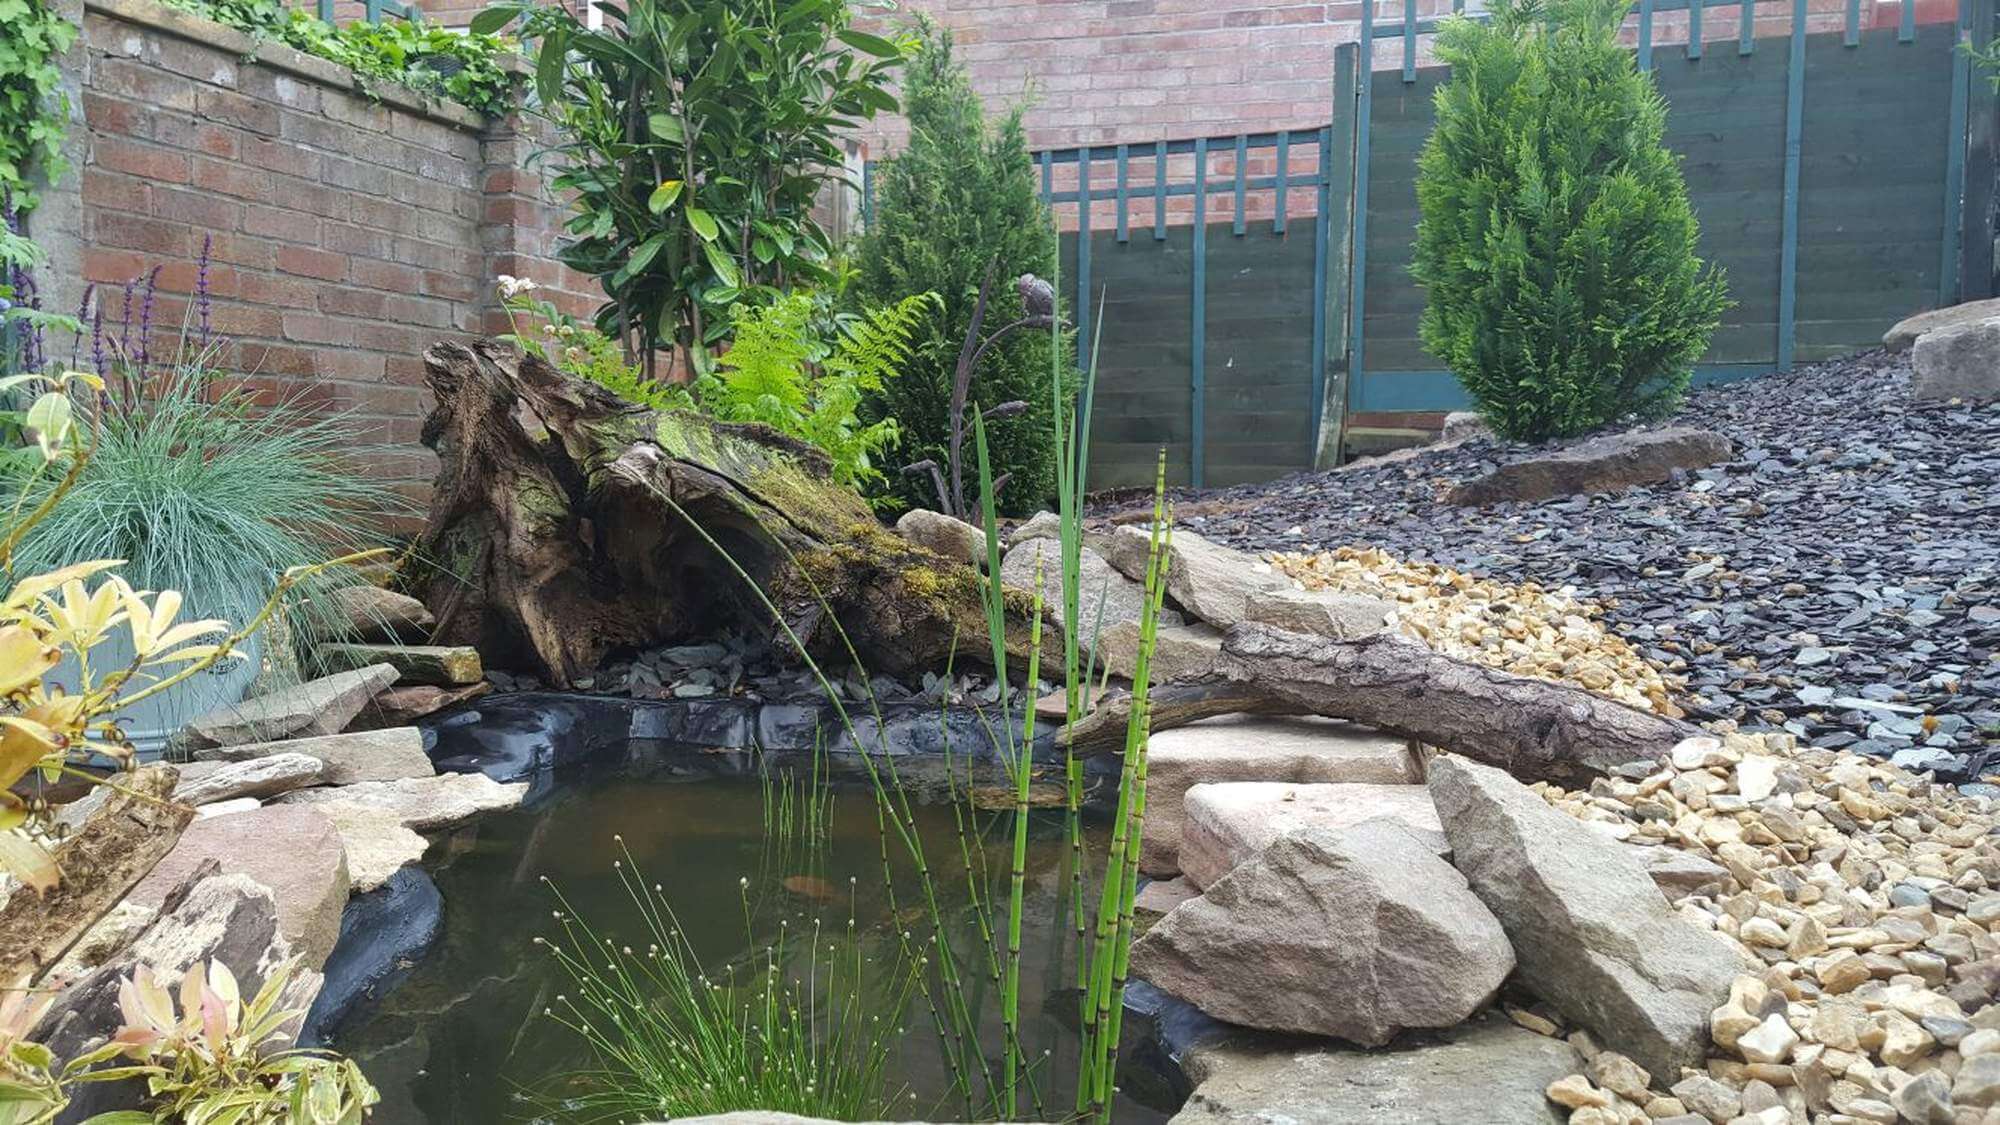 A beautiful natural looking pond courtesy of The Kelly Wildlife's garden